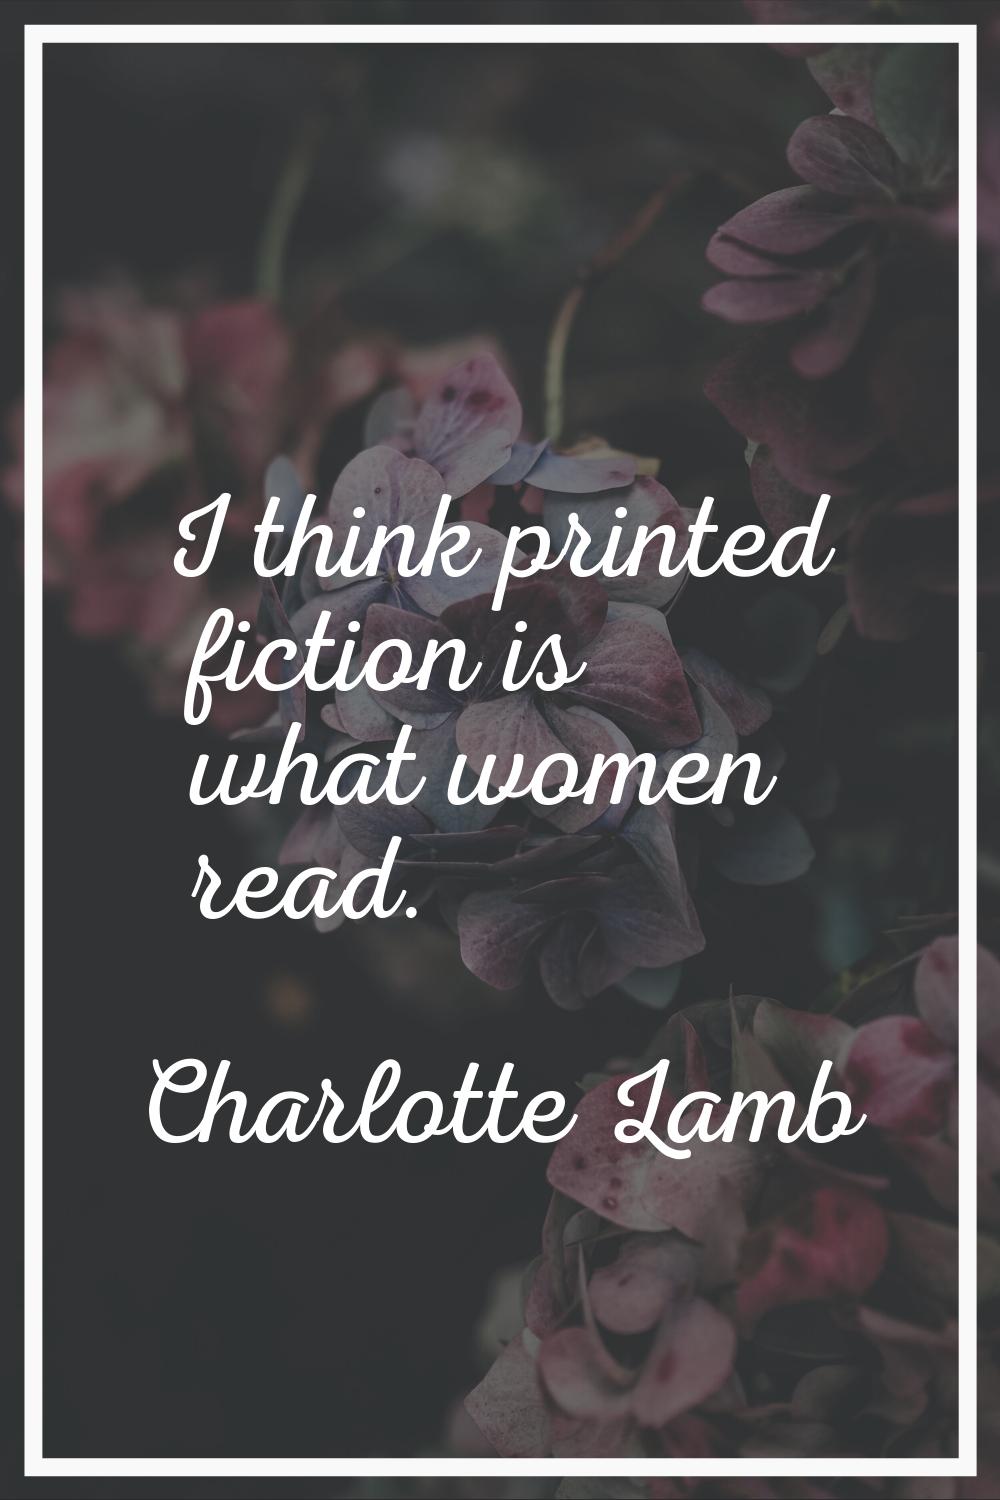 I think printed fiction is what women read.